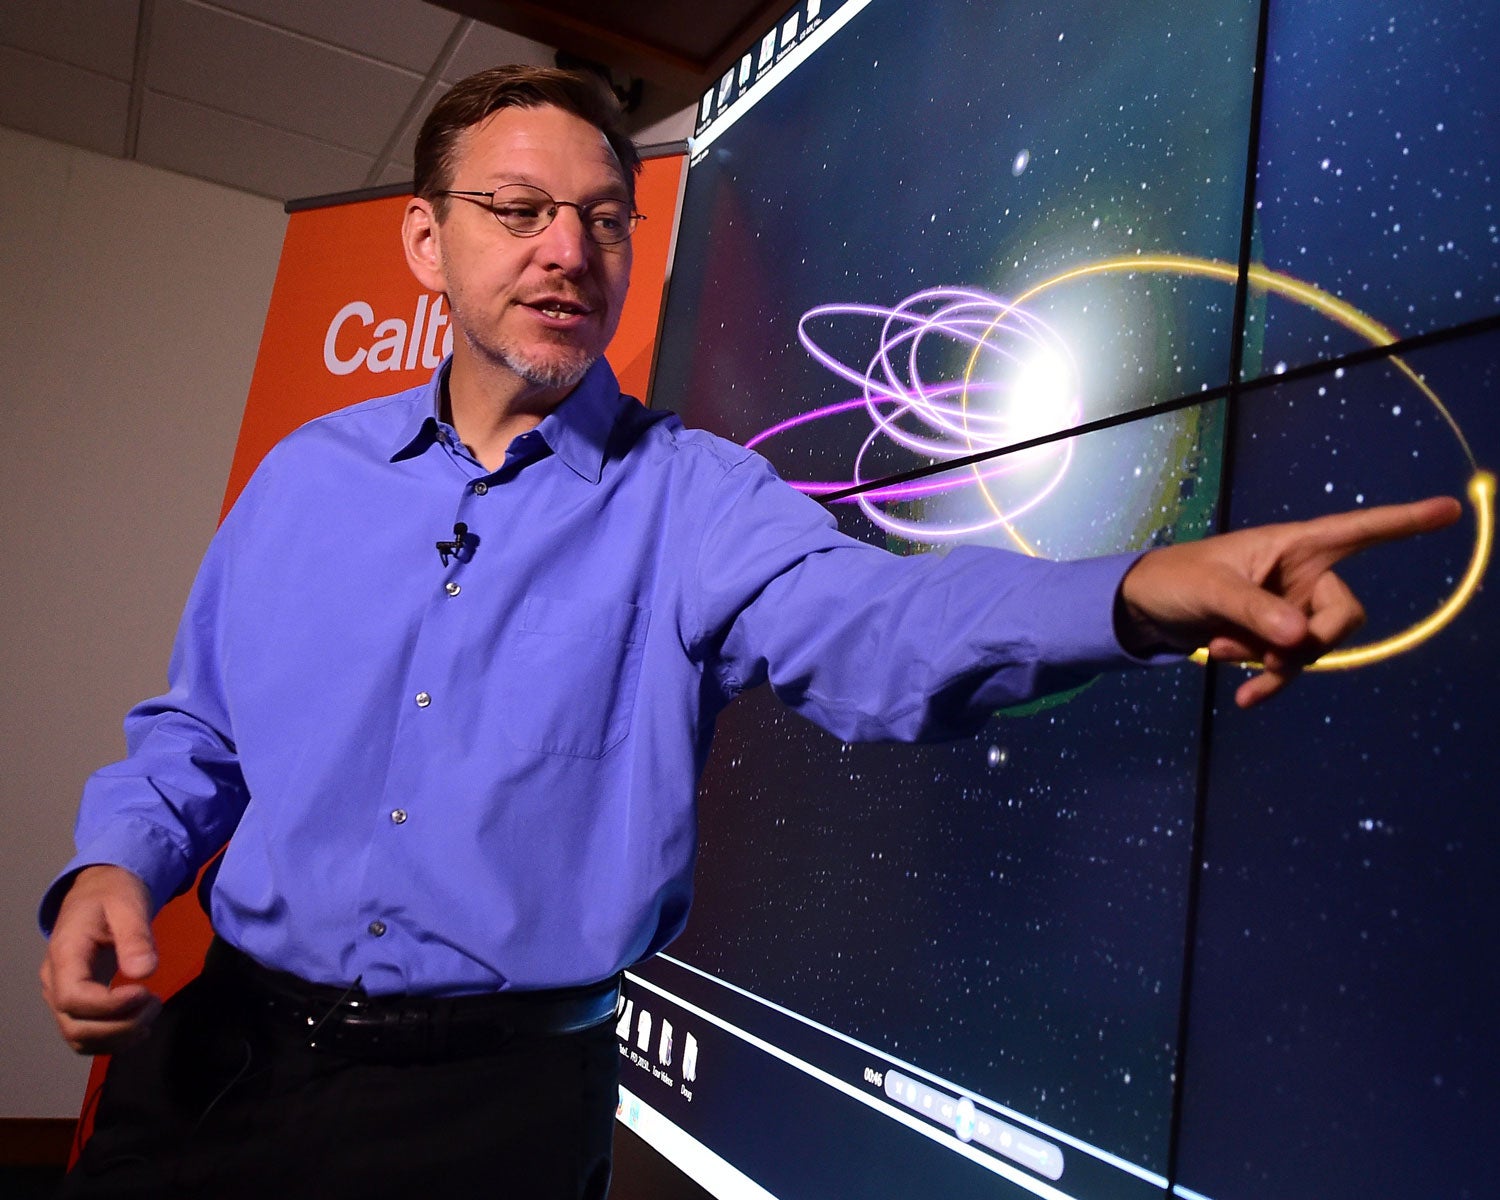 Mike Brown points out the Predicted Orbit of the 9th Planet at the Caltech Seismology Lab